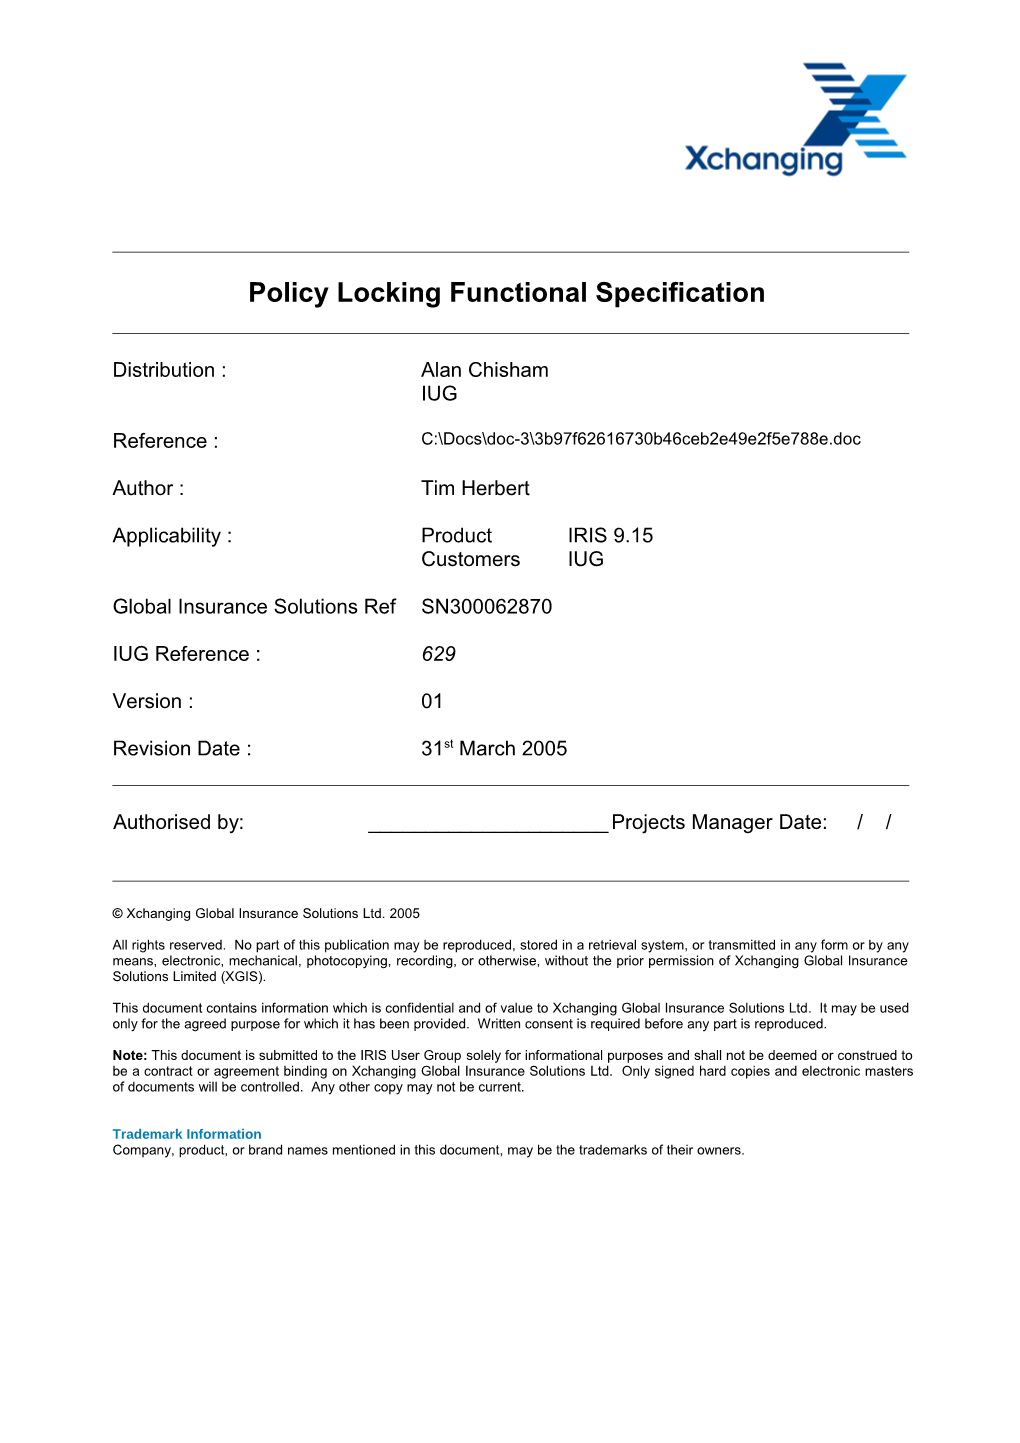 Policy Locking Functional Specification